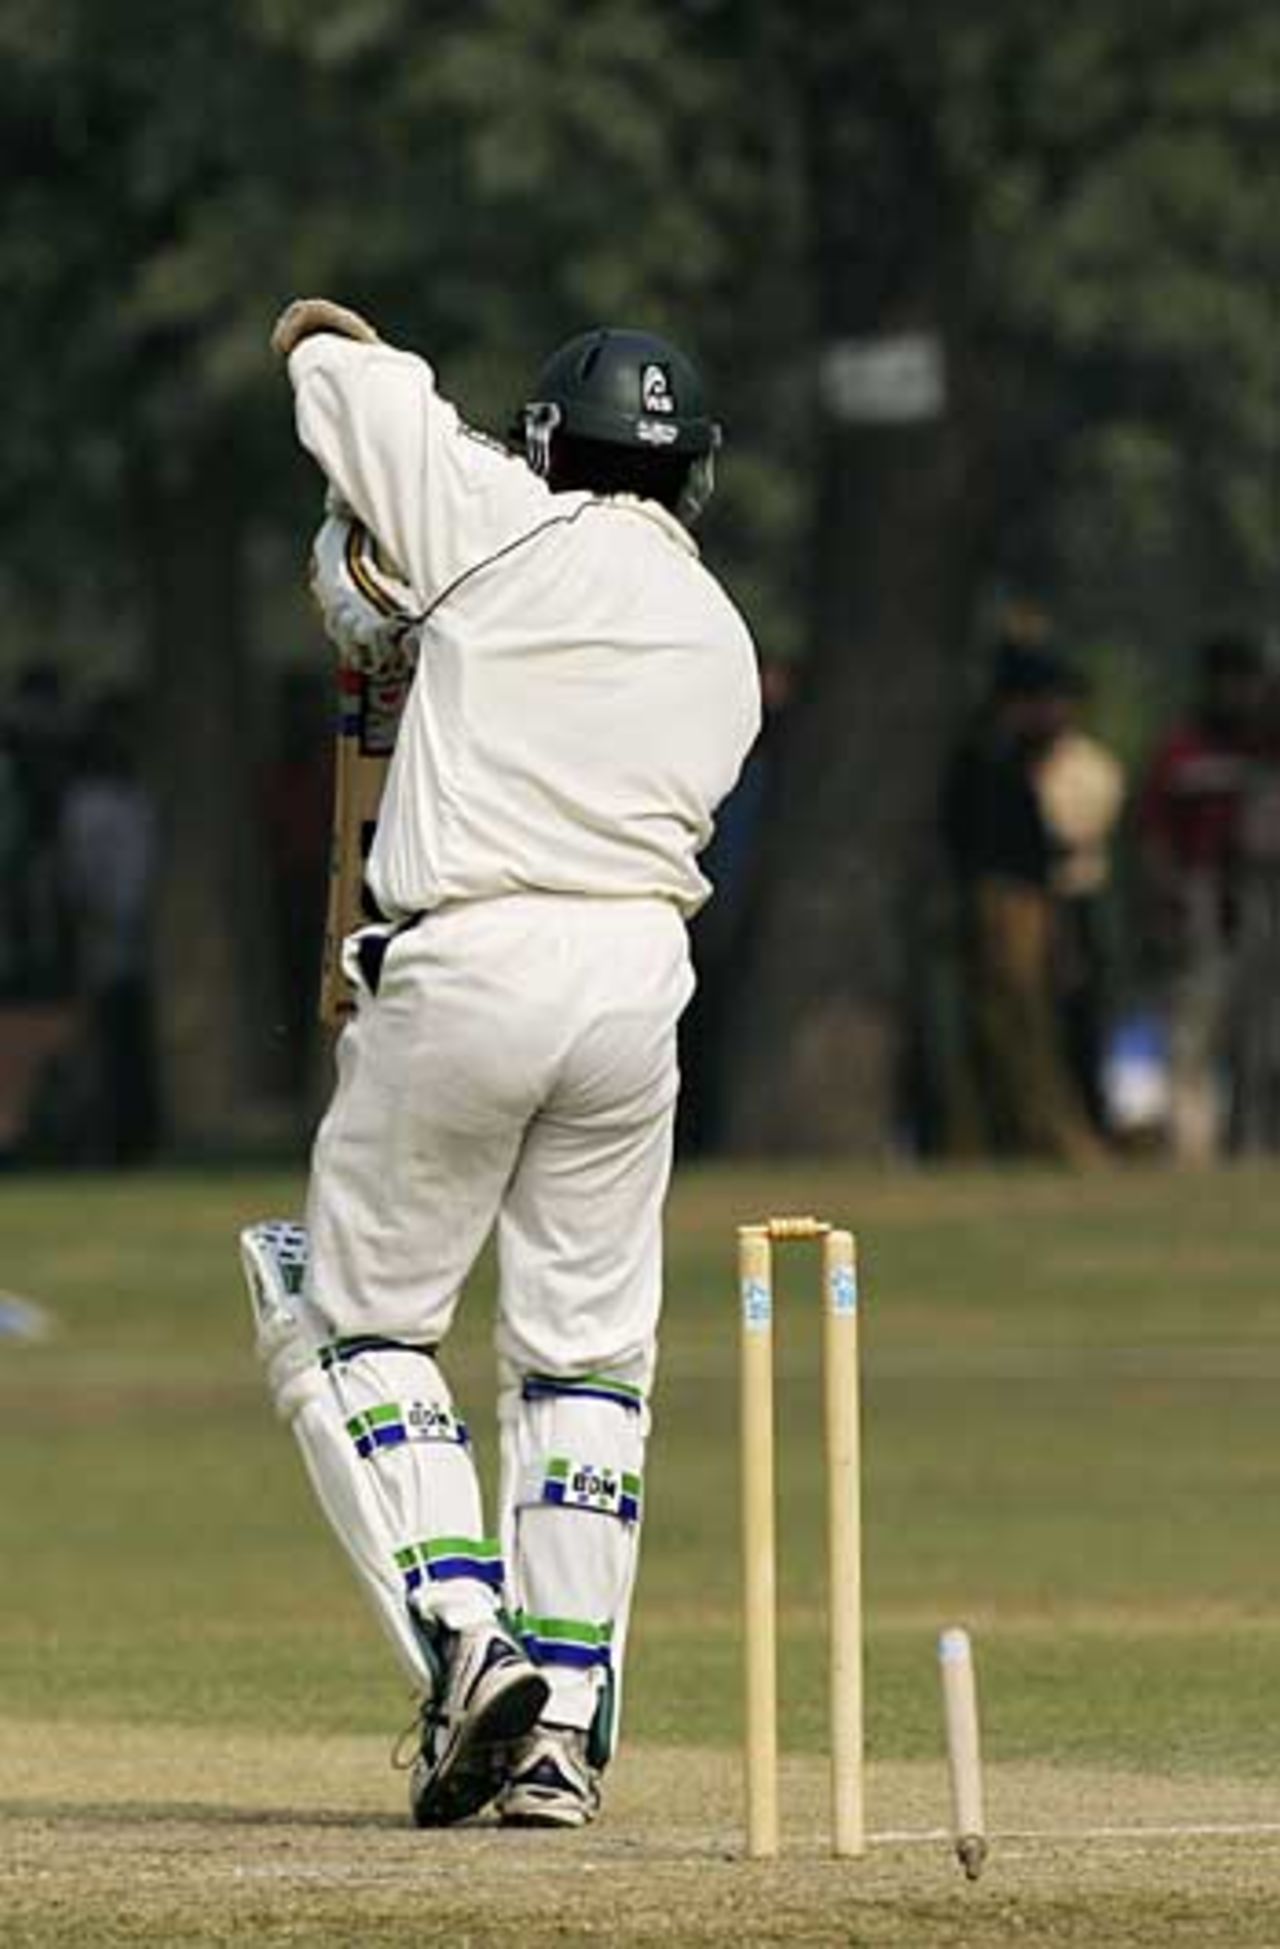 Shahid Nazir loses his off stump to an Andrew Flintoff yorker, Pakistan A v England XI, Tour Match, Lahore, November 8, 2005